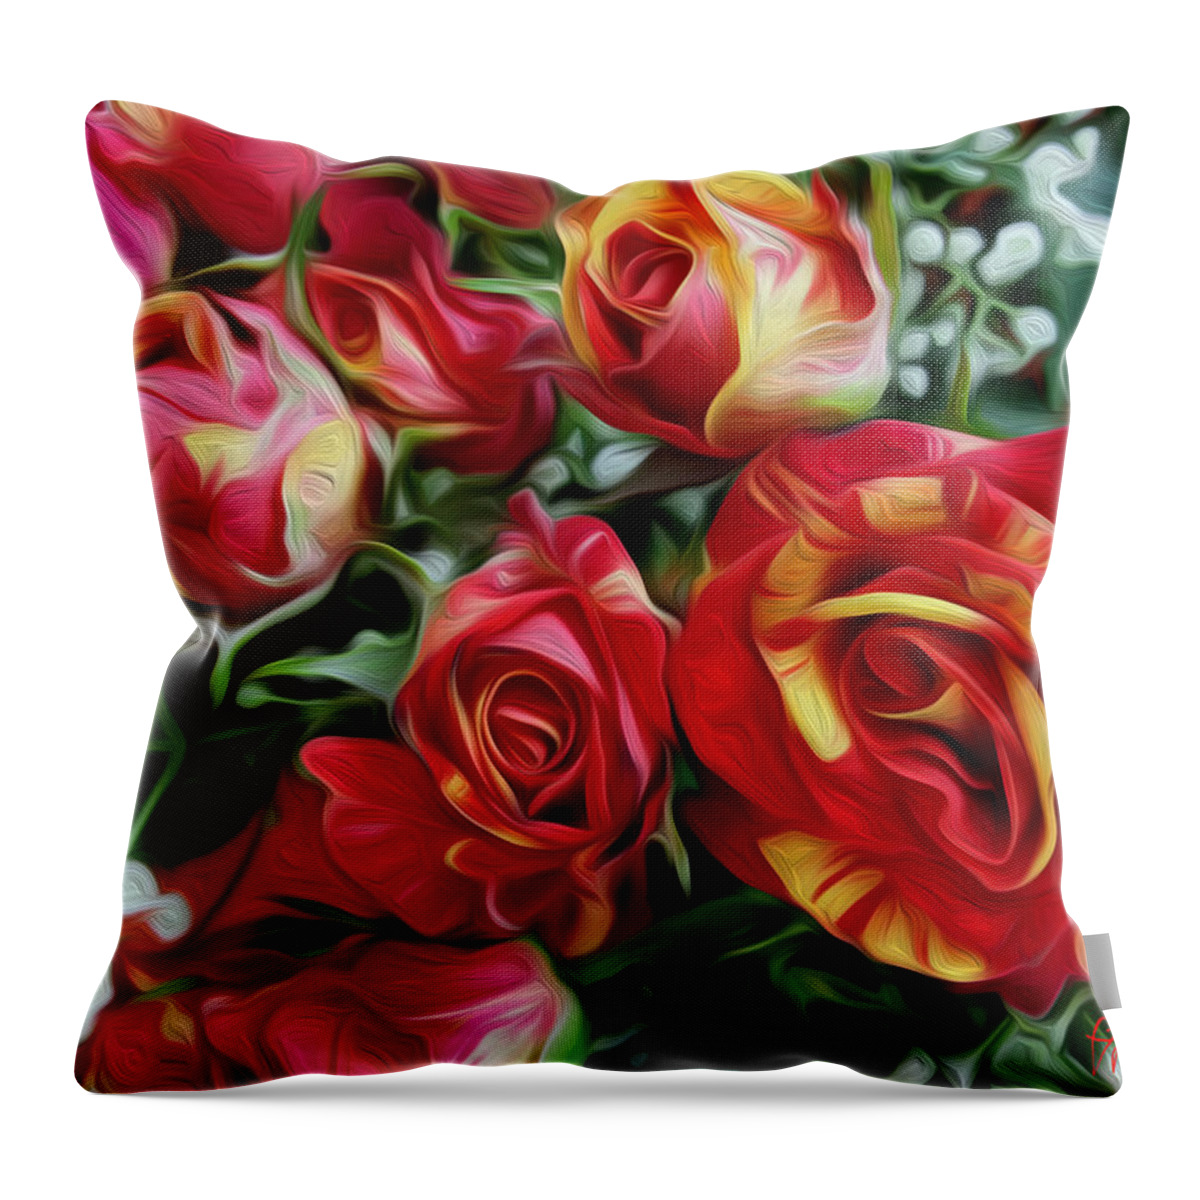 Greeting Cards Throw Pillow featuring the digital art Valentine's Day Surprise by Vincent Franco